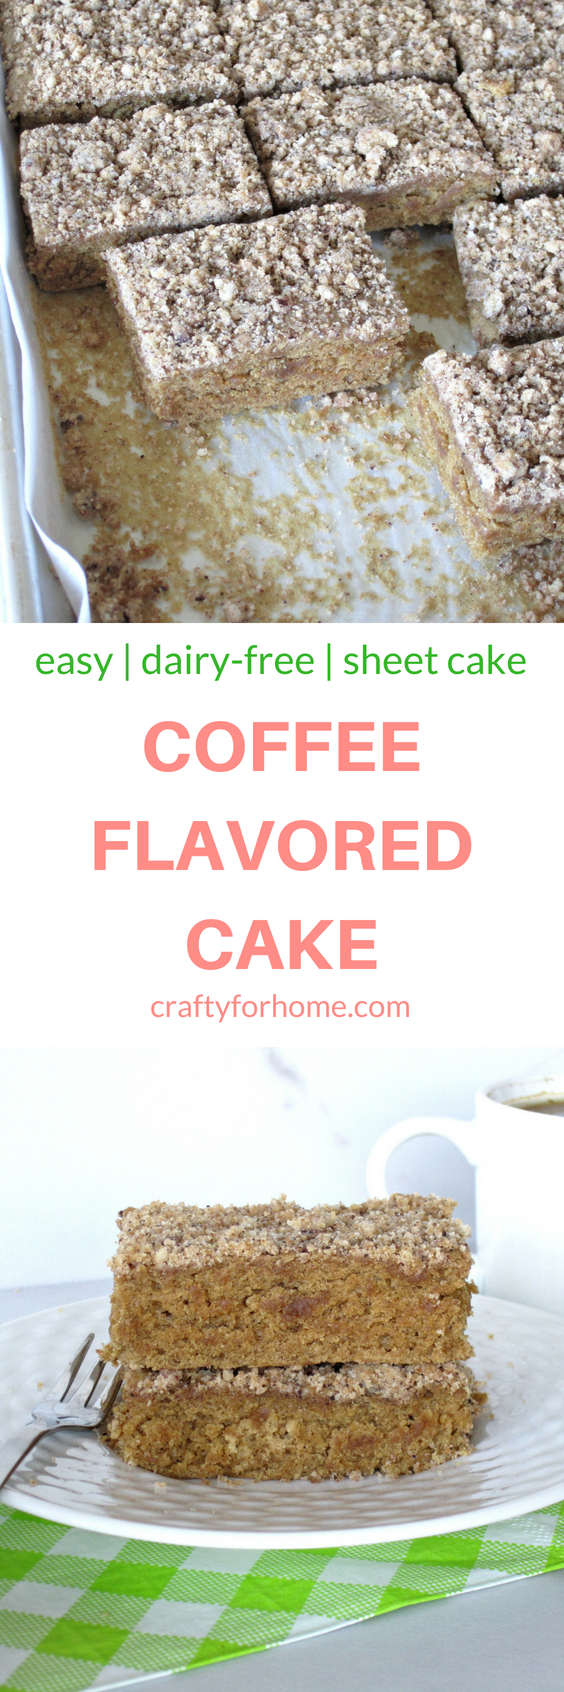 Easy dairy-free Coffee Flavored Sheet Cake recipe with brown sugar streusel topping for dessert, breakfast or enjoy it with a cup of coffee for afternoon snack #coffeecake #sheetcake #dairyfreecake for full recipe on craftyforhome.com